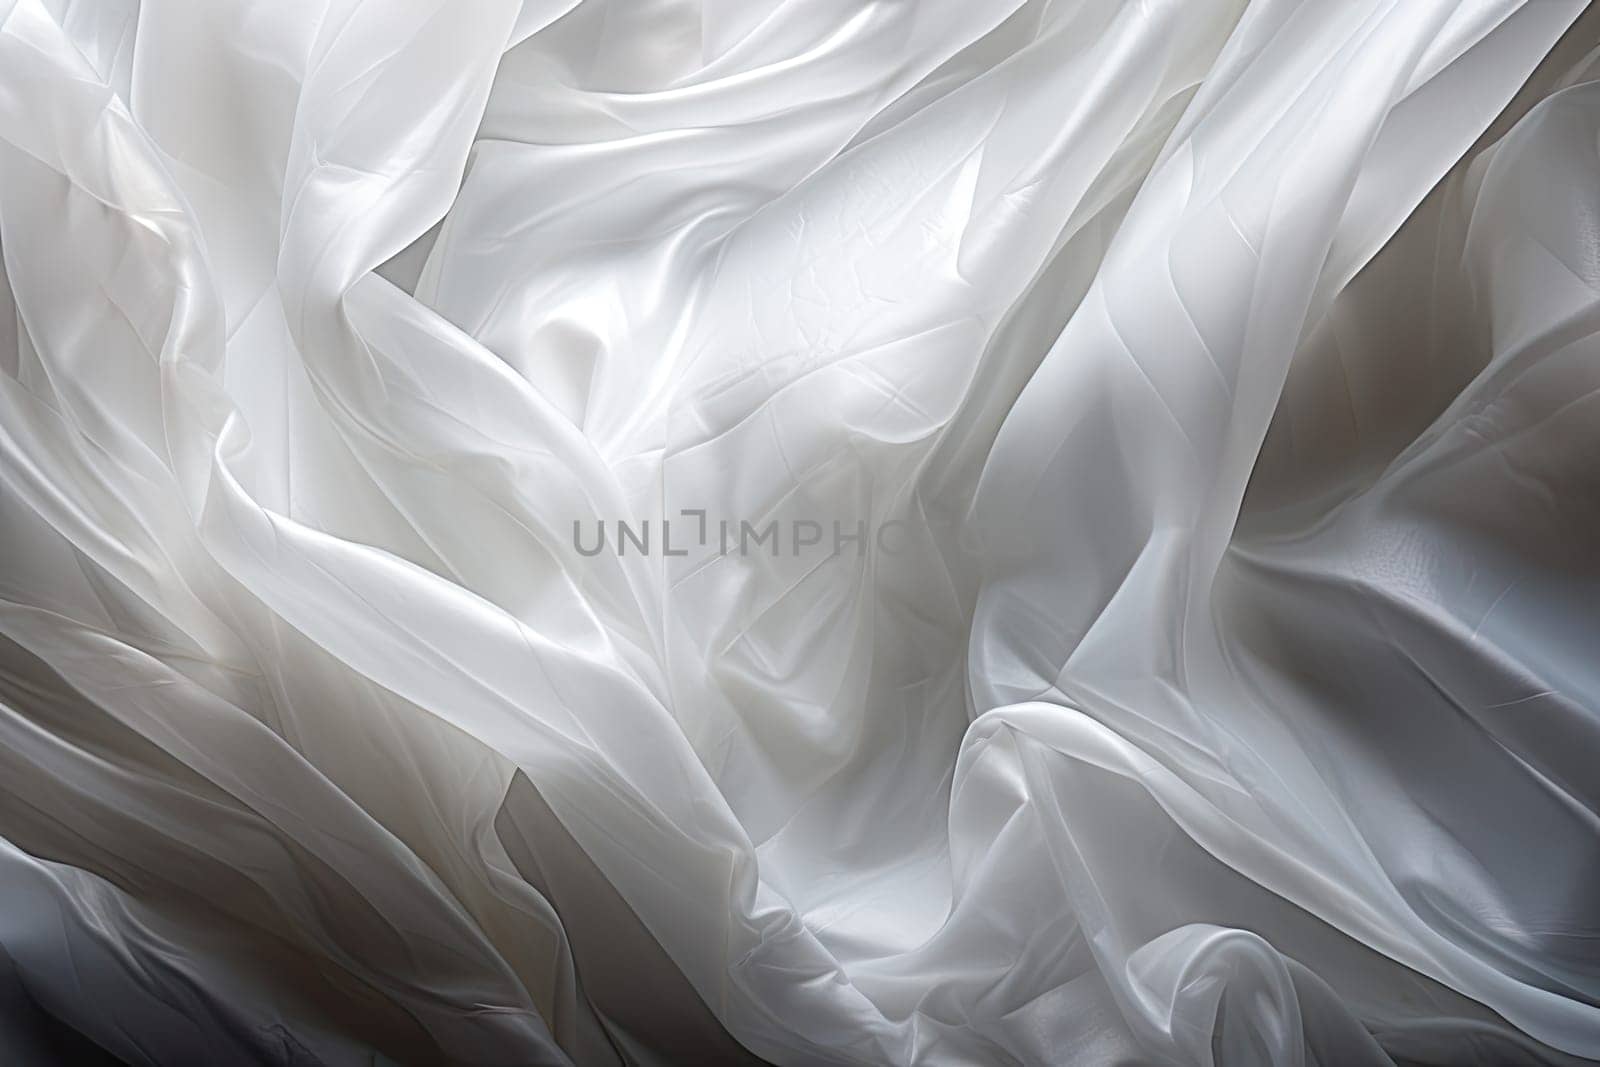 A Serene Monochrome Capture of a Billowing, White Cloth Floating in Stillness